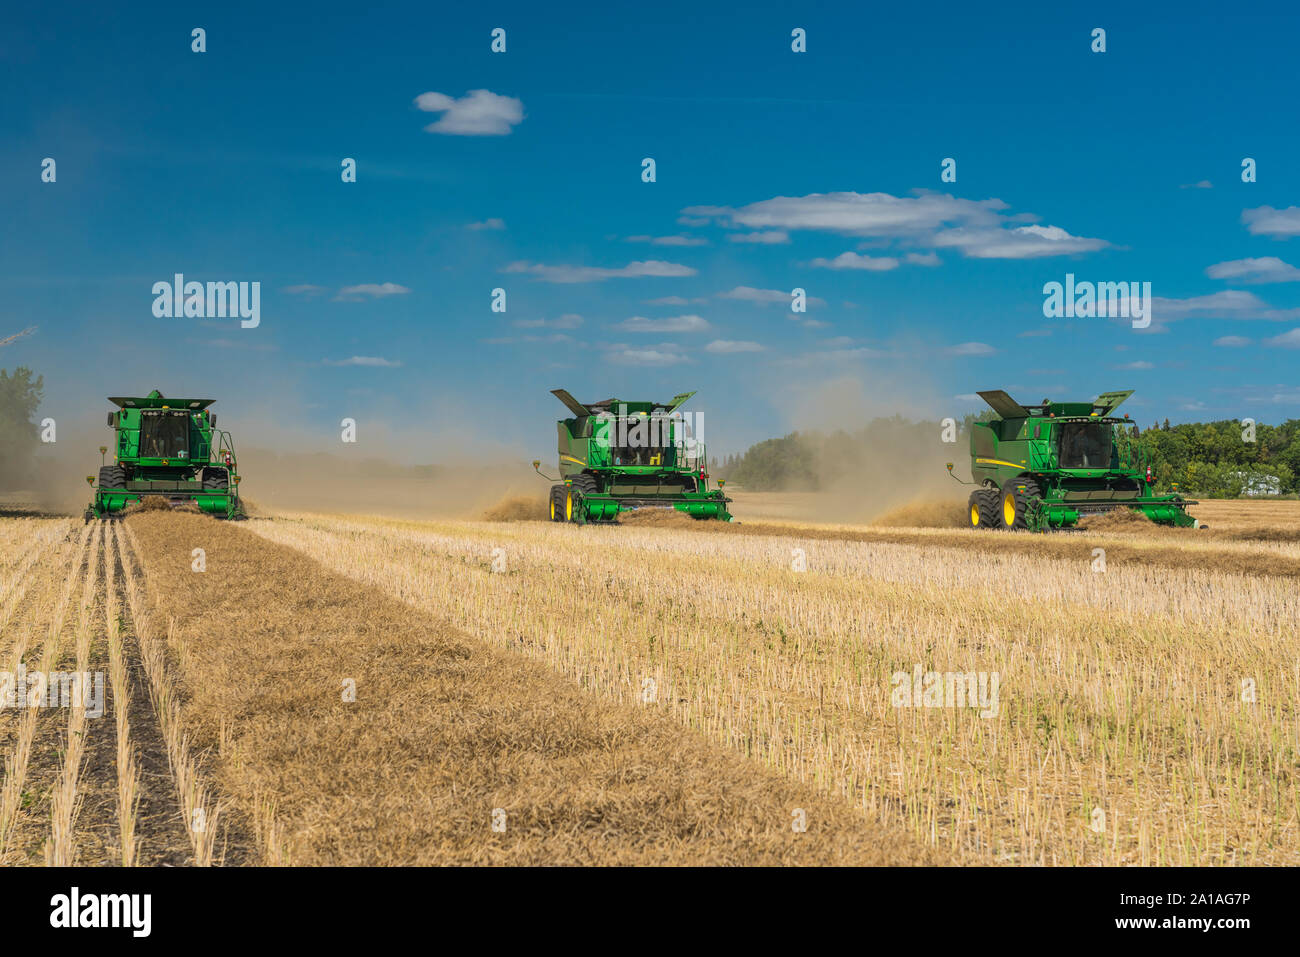 Three combines harvesting canola on a field on the Froese farm near Winkler, Manitoba, Canada. Stock Photo